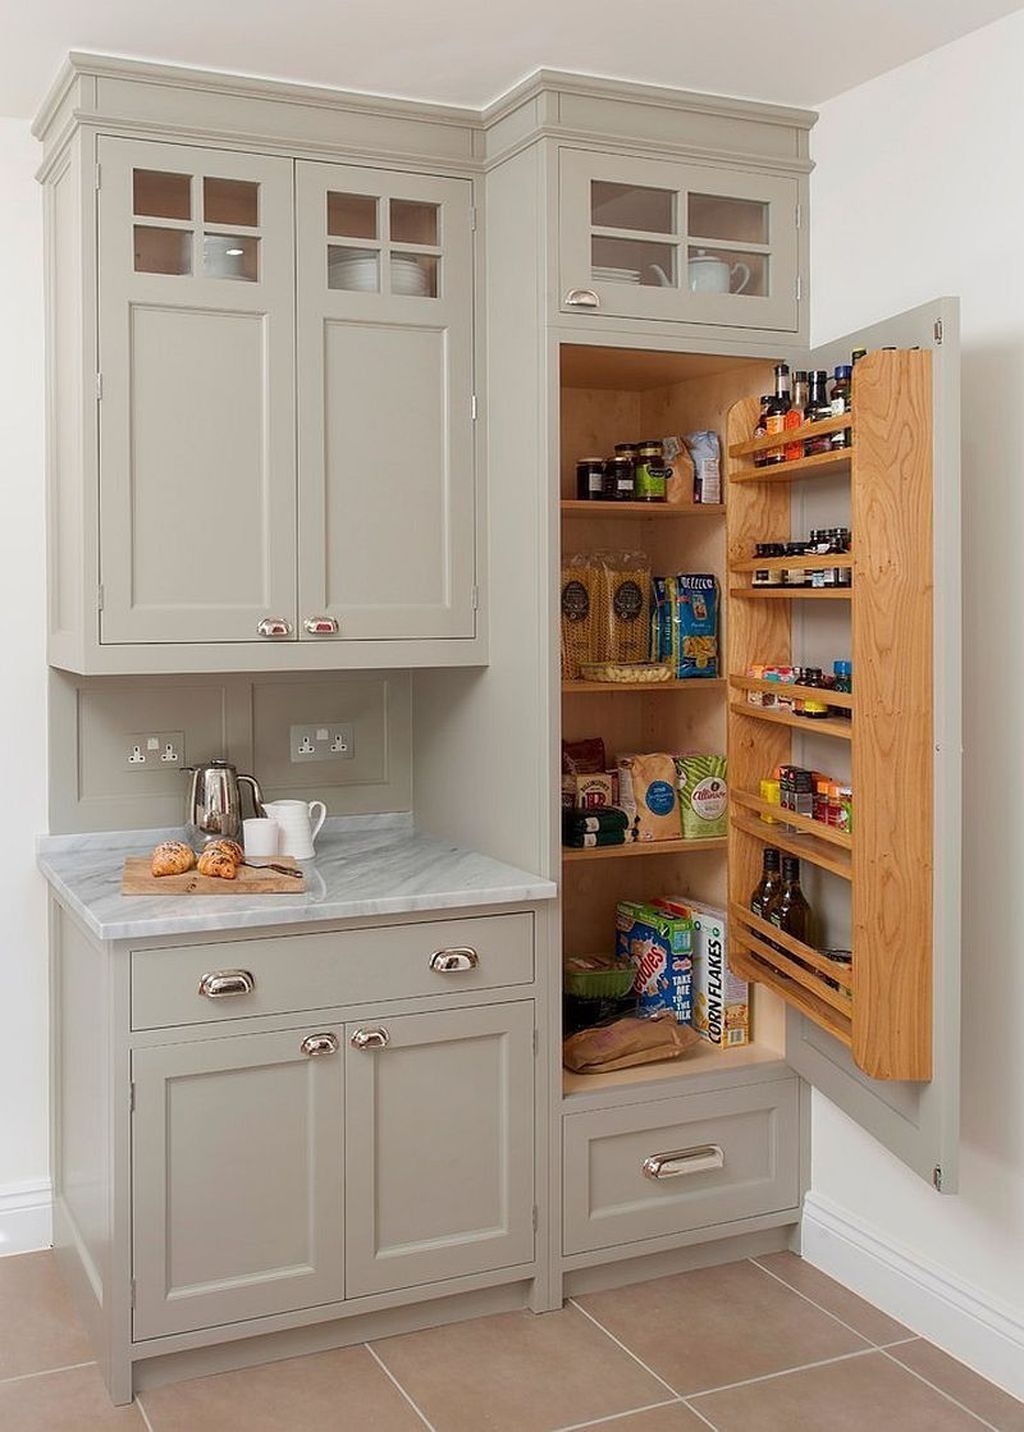 Comfy Kitchen Remodel Ideas With Some Storage